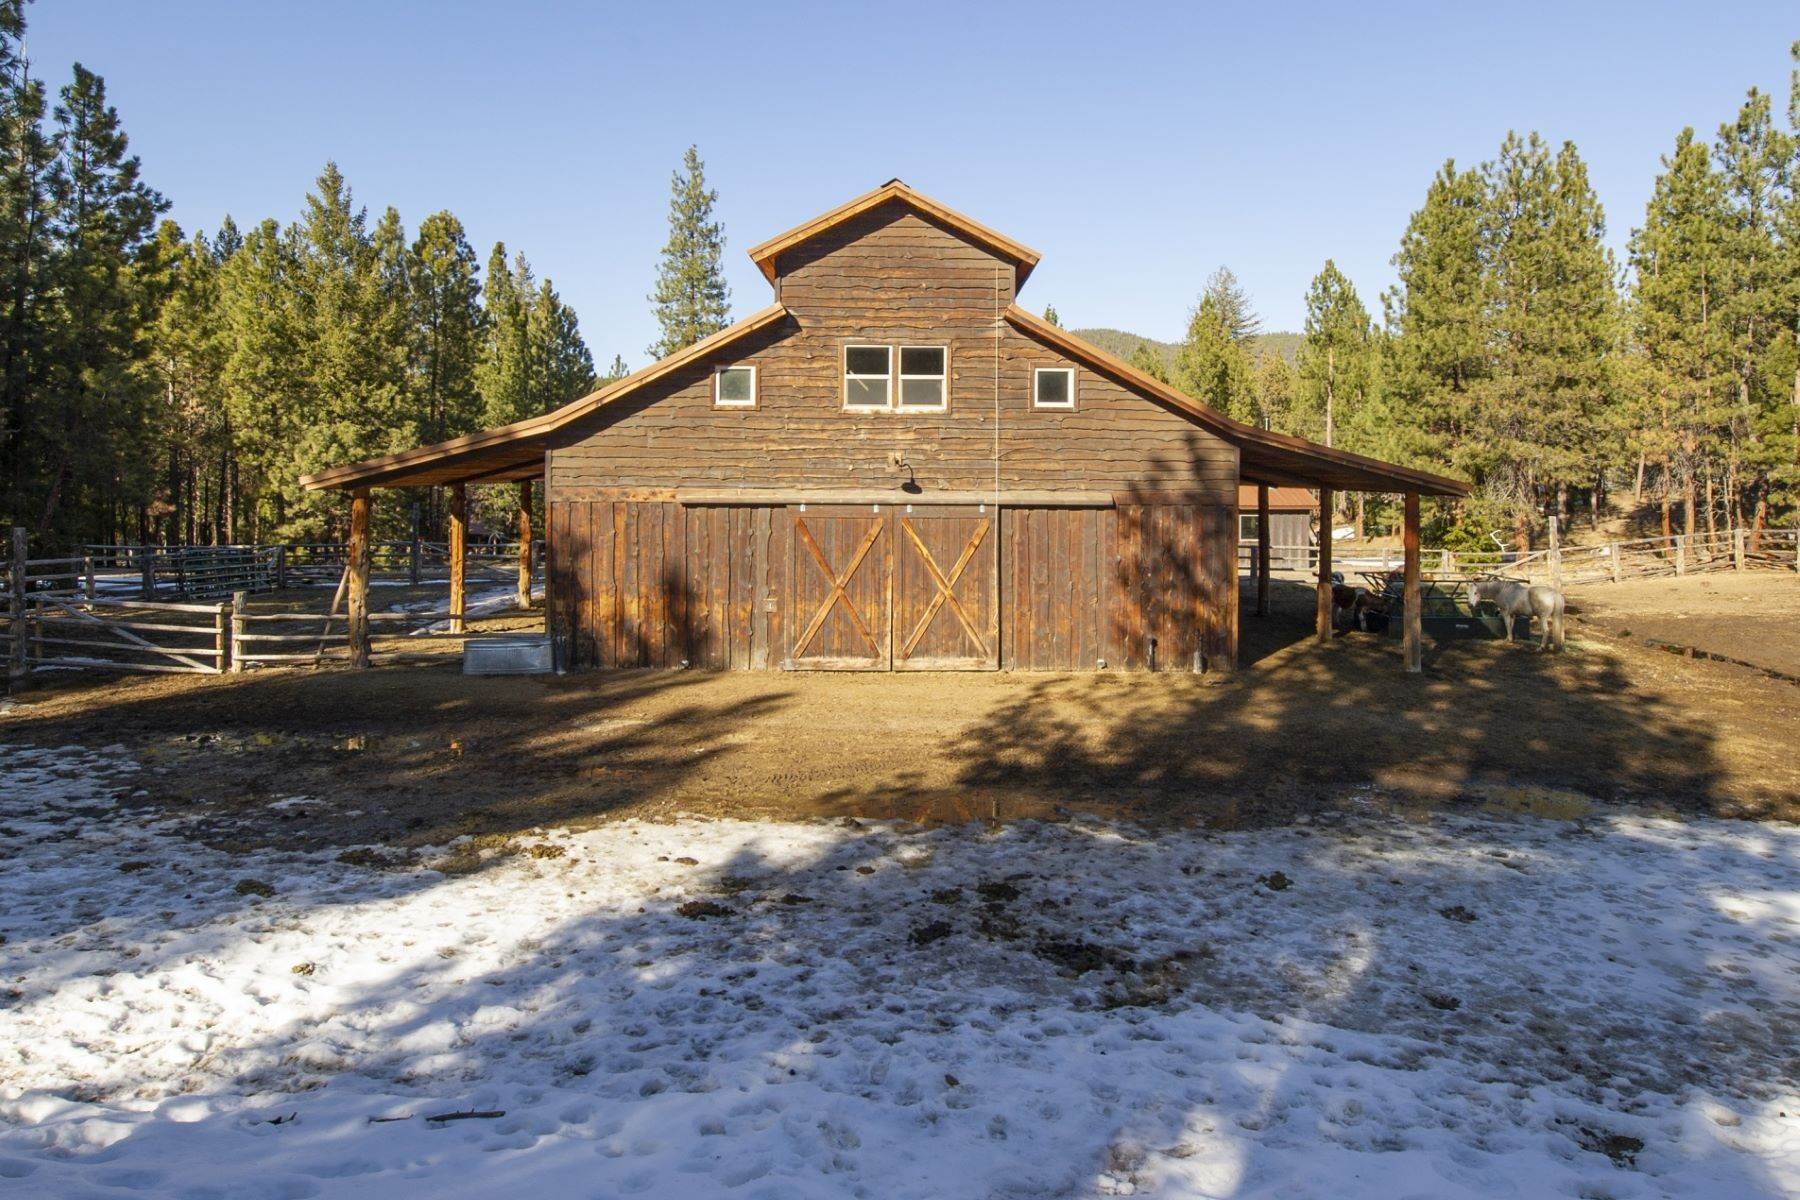 22. Farm and Ranch Properties for Sale at 27850 NE Old Wolf Creek Road Prineville, OR 97754 27850 NE Old Wolf Creek Road Prineville, Oregon 97754 United States